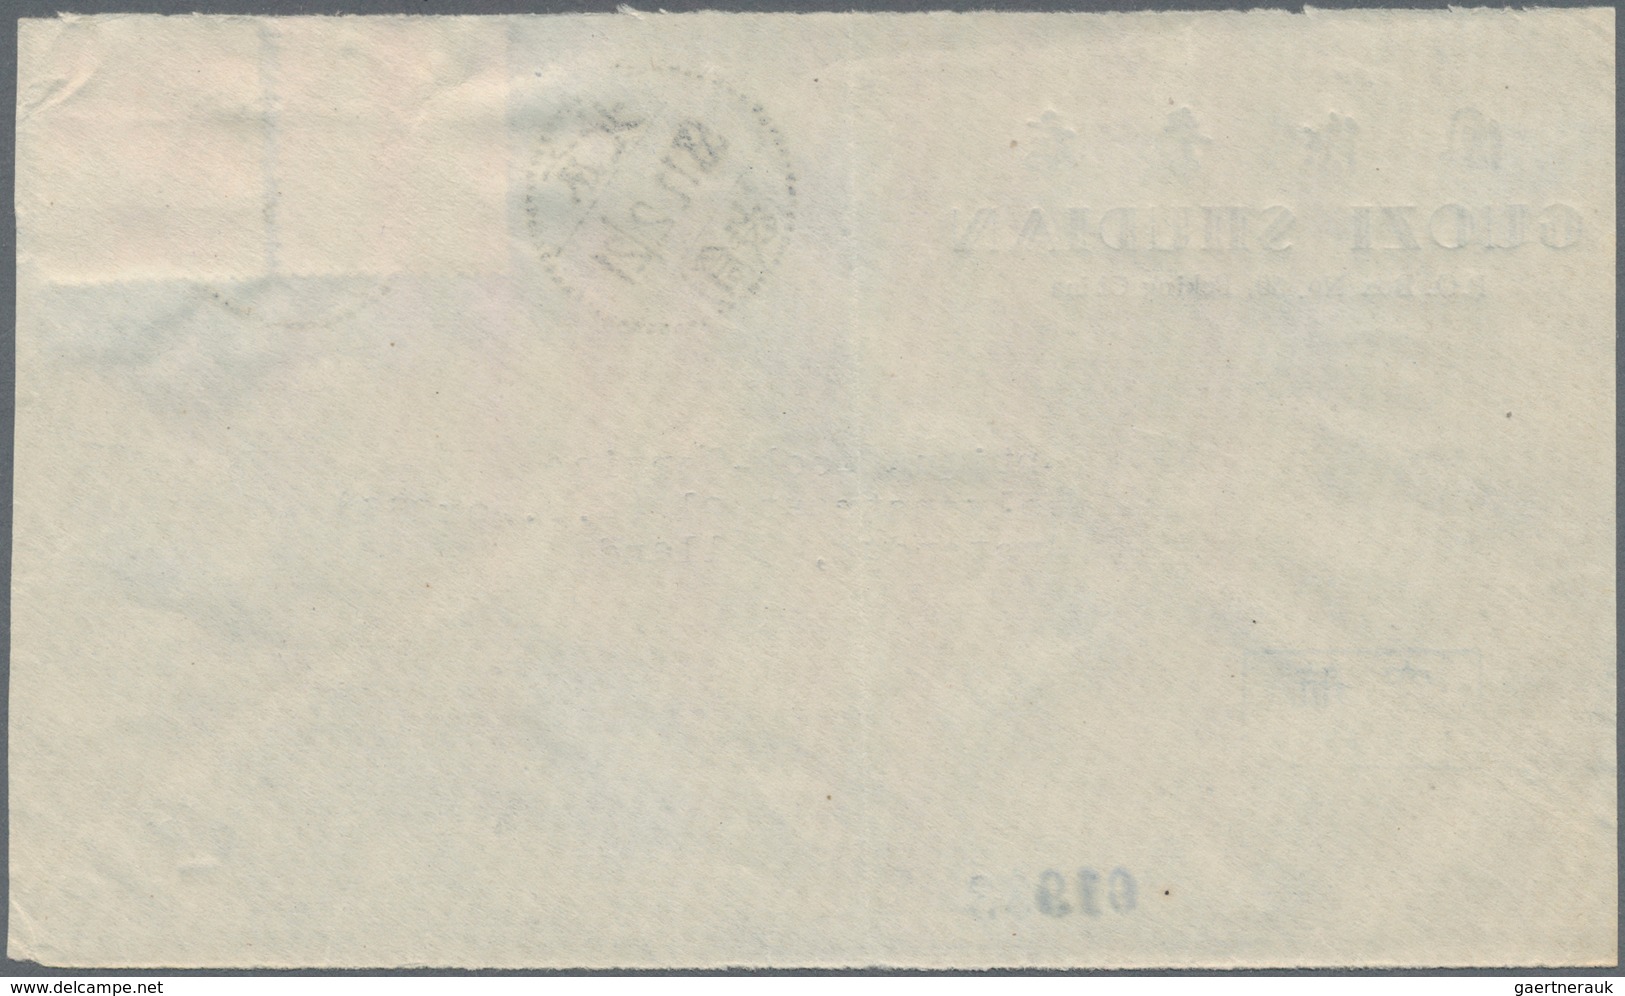 China - Volksrepublik: 1950/51, Tien AnMen issues up to $20.000 on airmail covers (5 + 1 front) to S